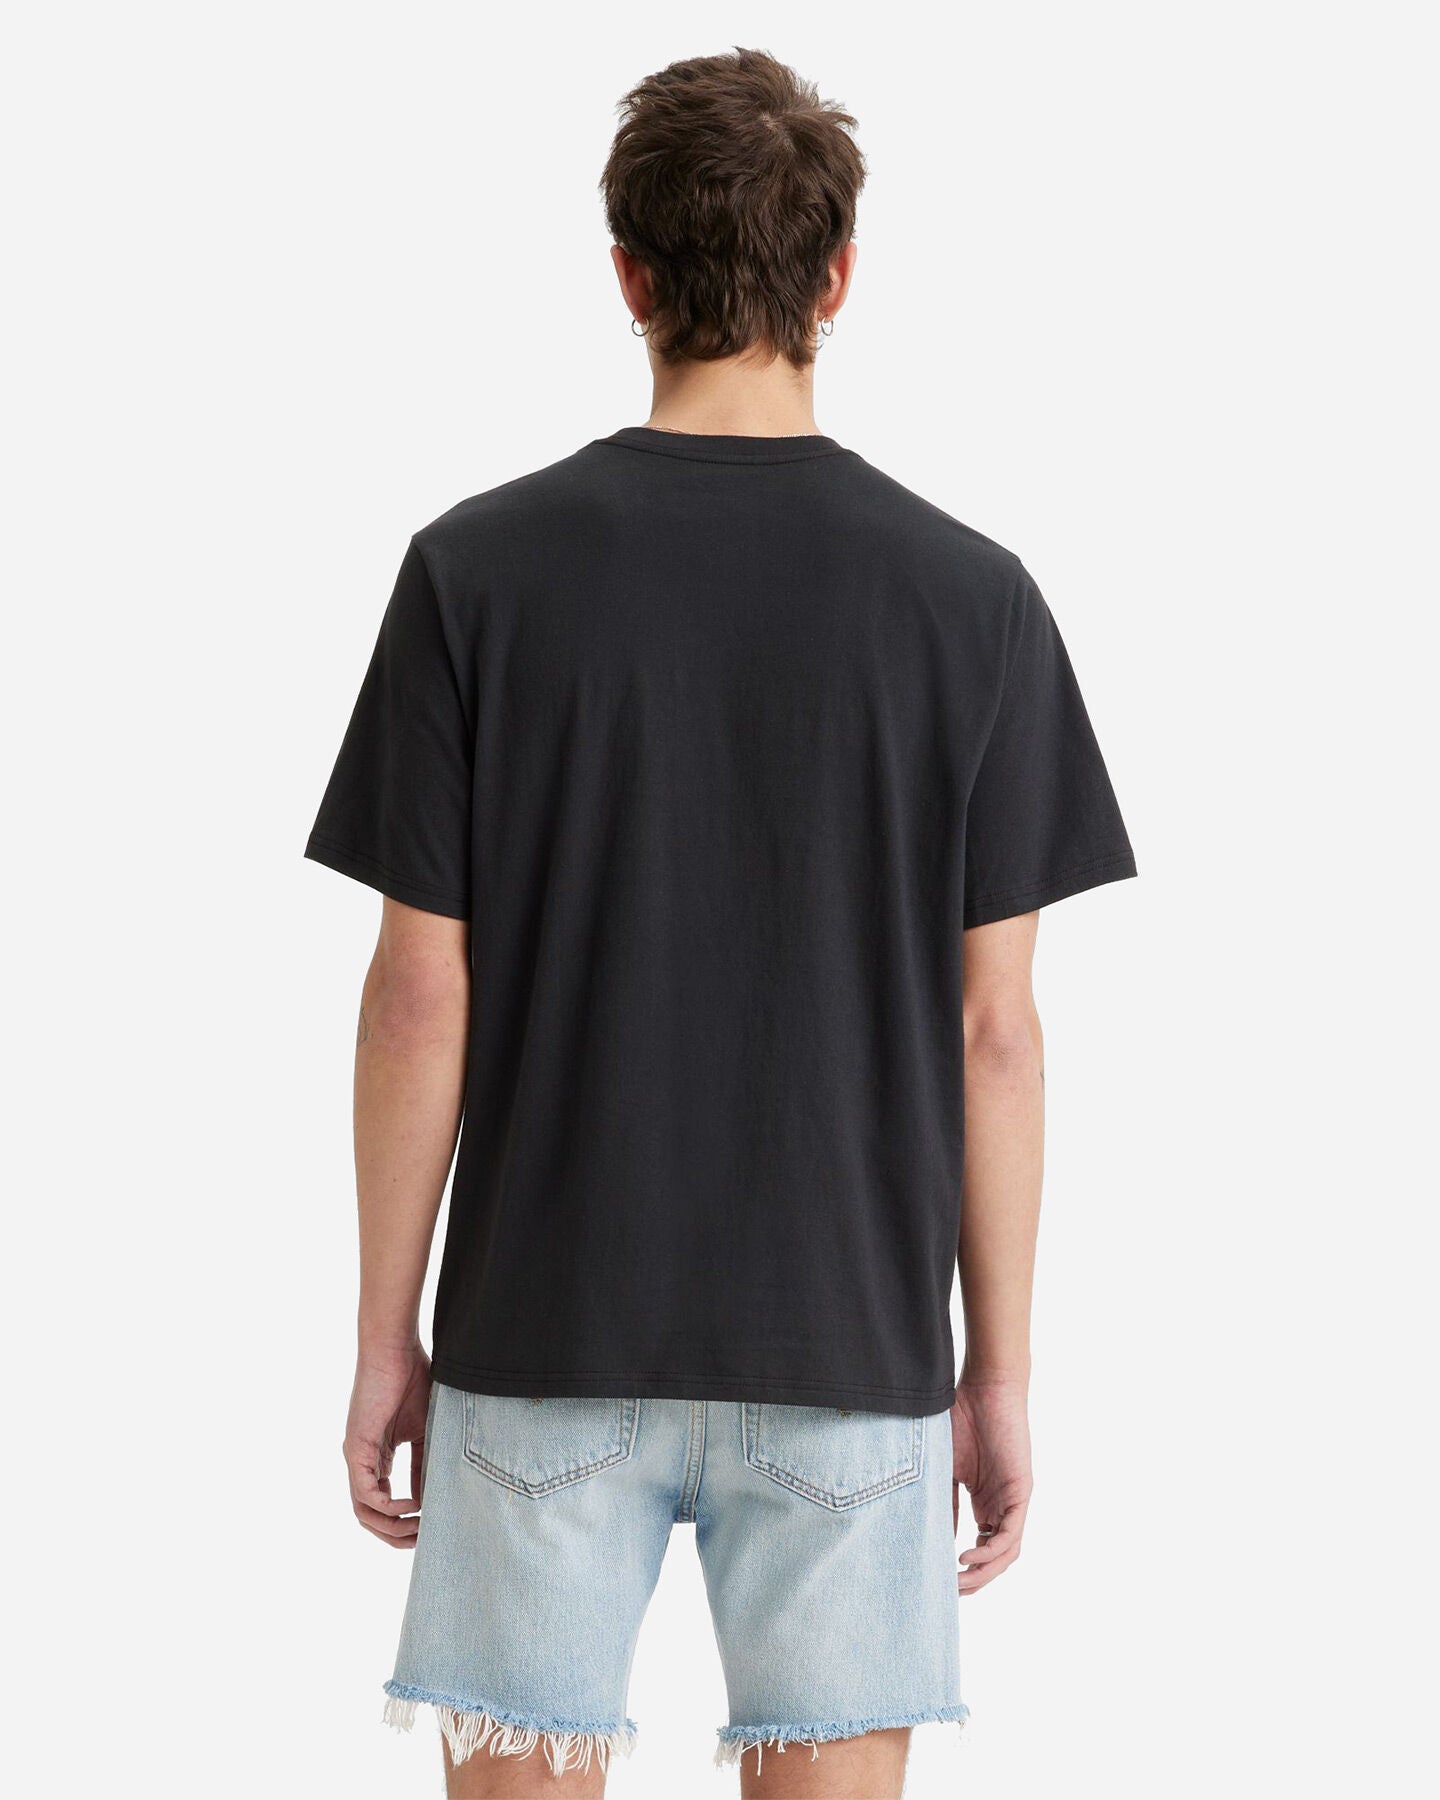 Levi's uomo t-shirt ss relaxed fit 16143-1204